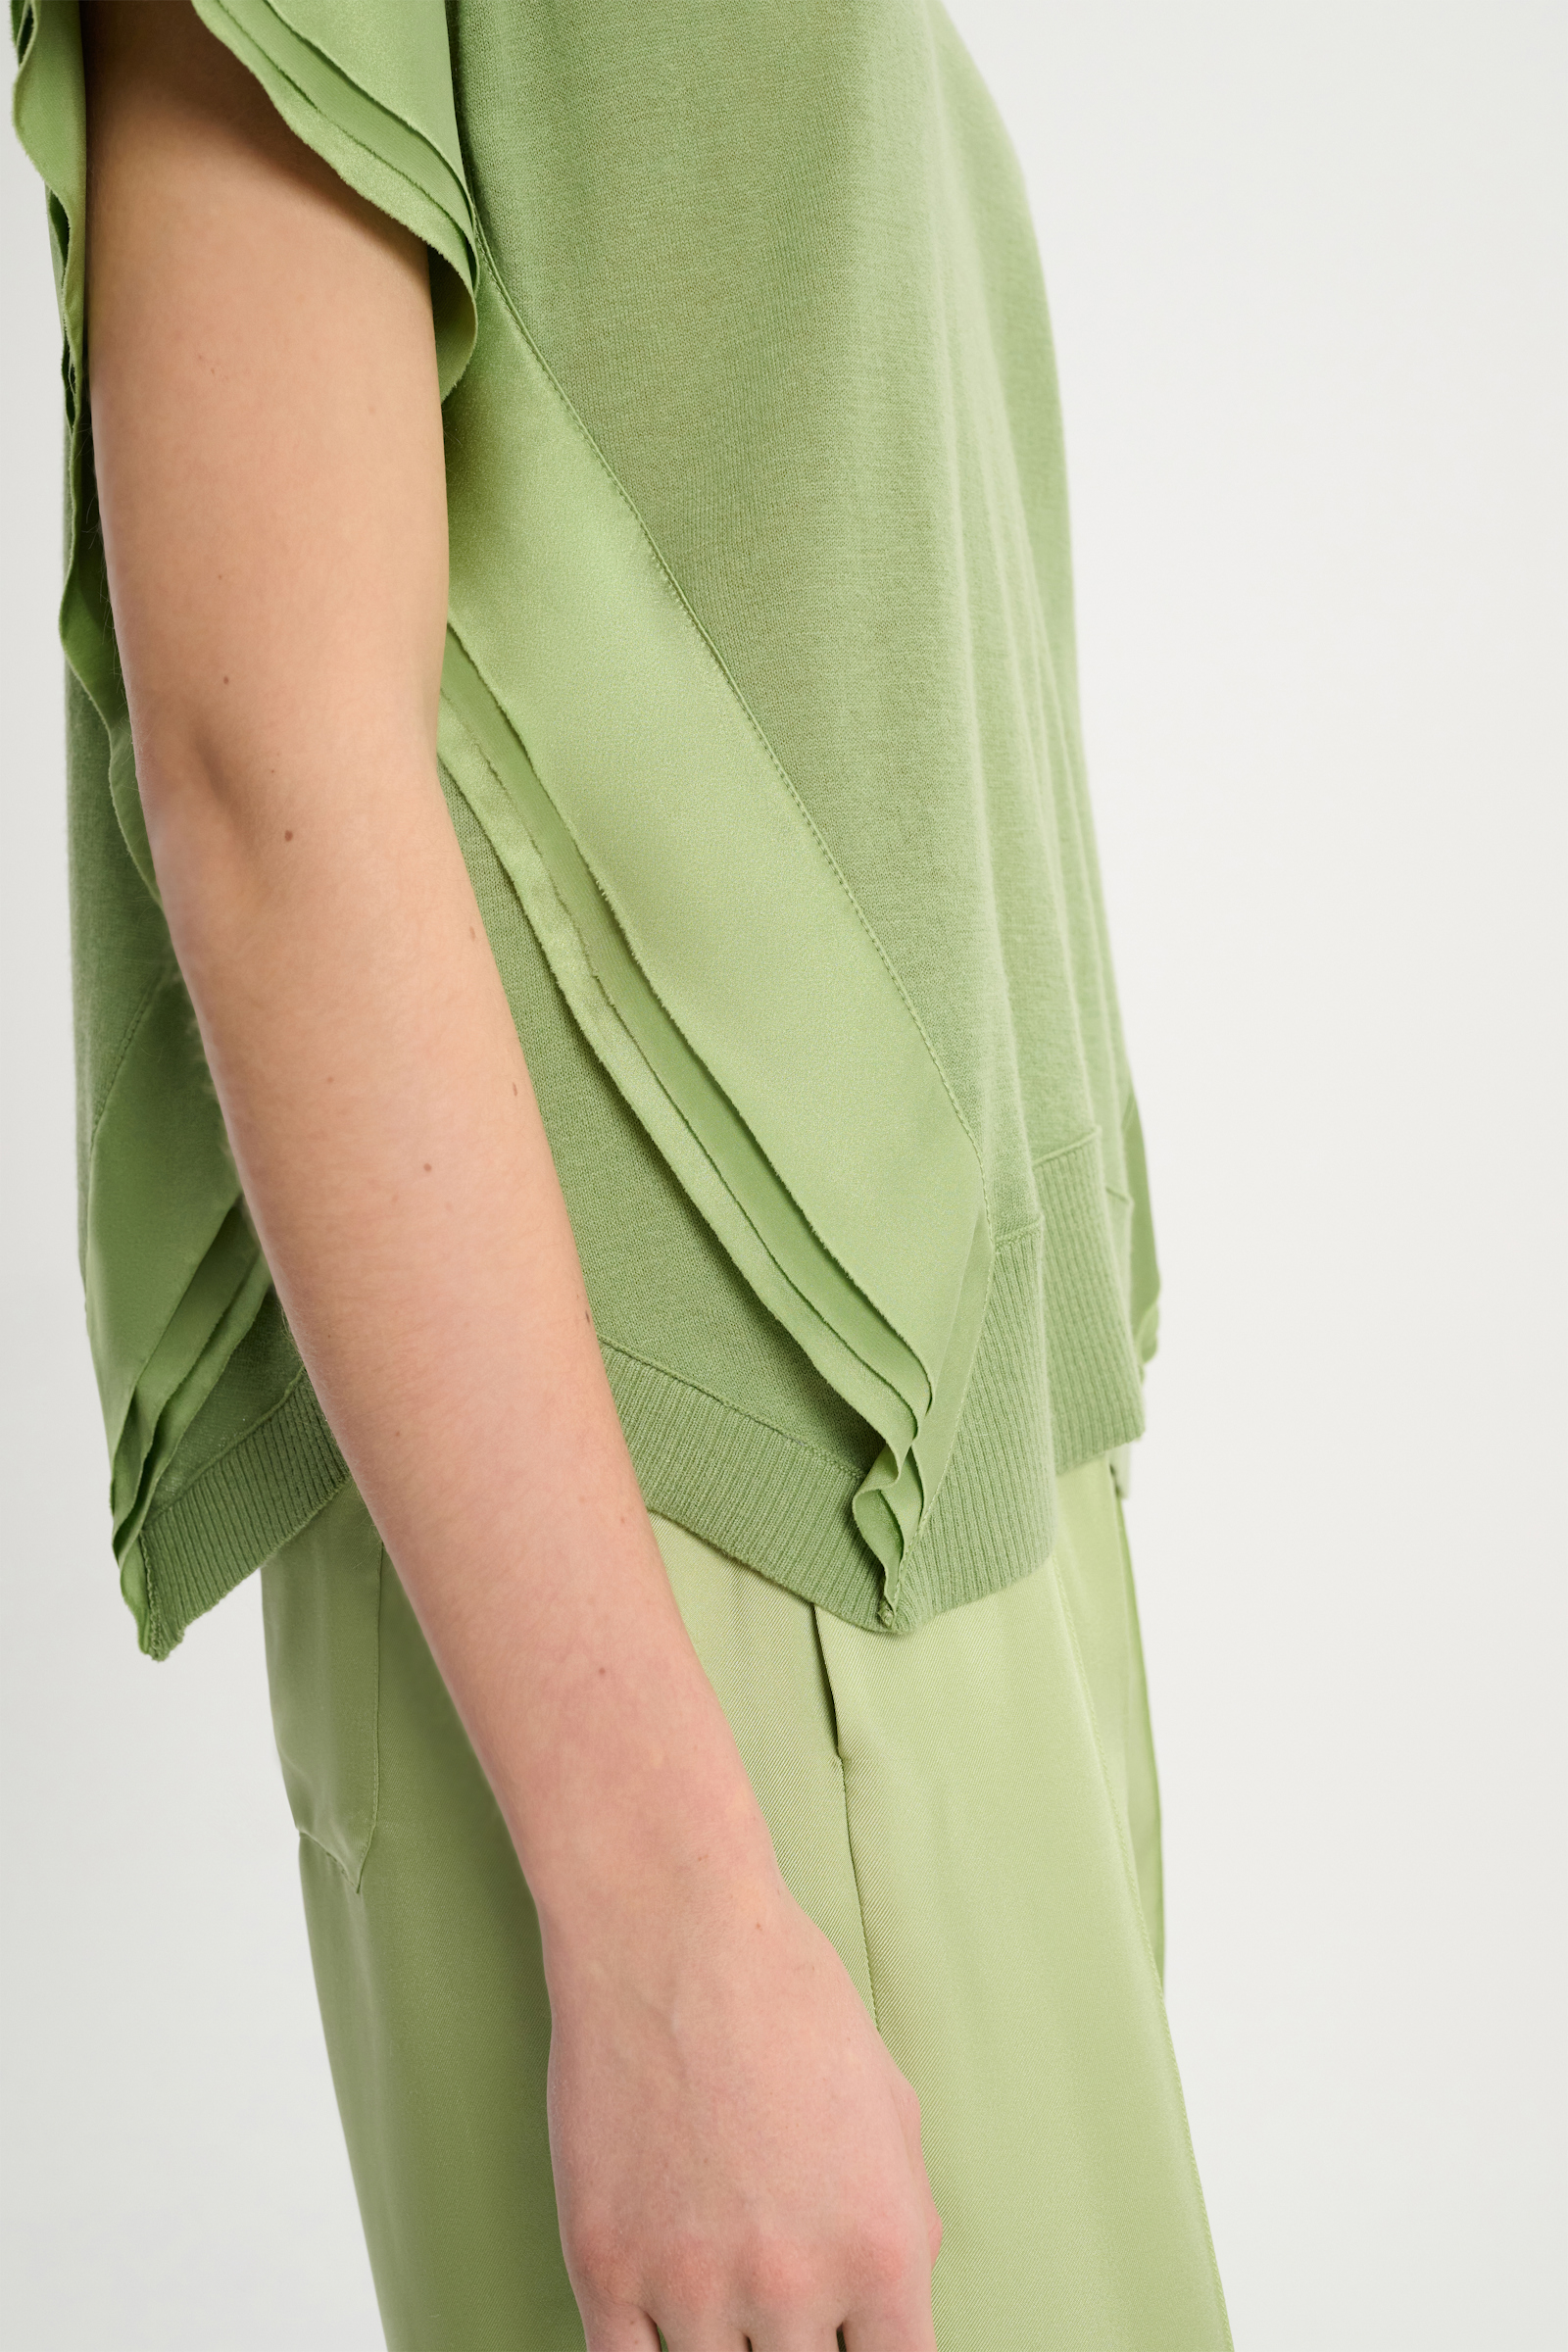 Dorothee Schumacher Wool-cashmere knit top with layered satin trim soft green